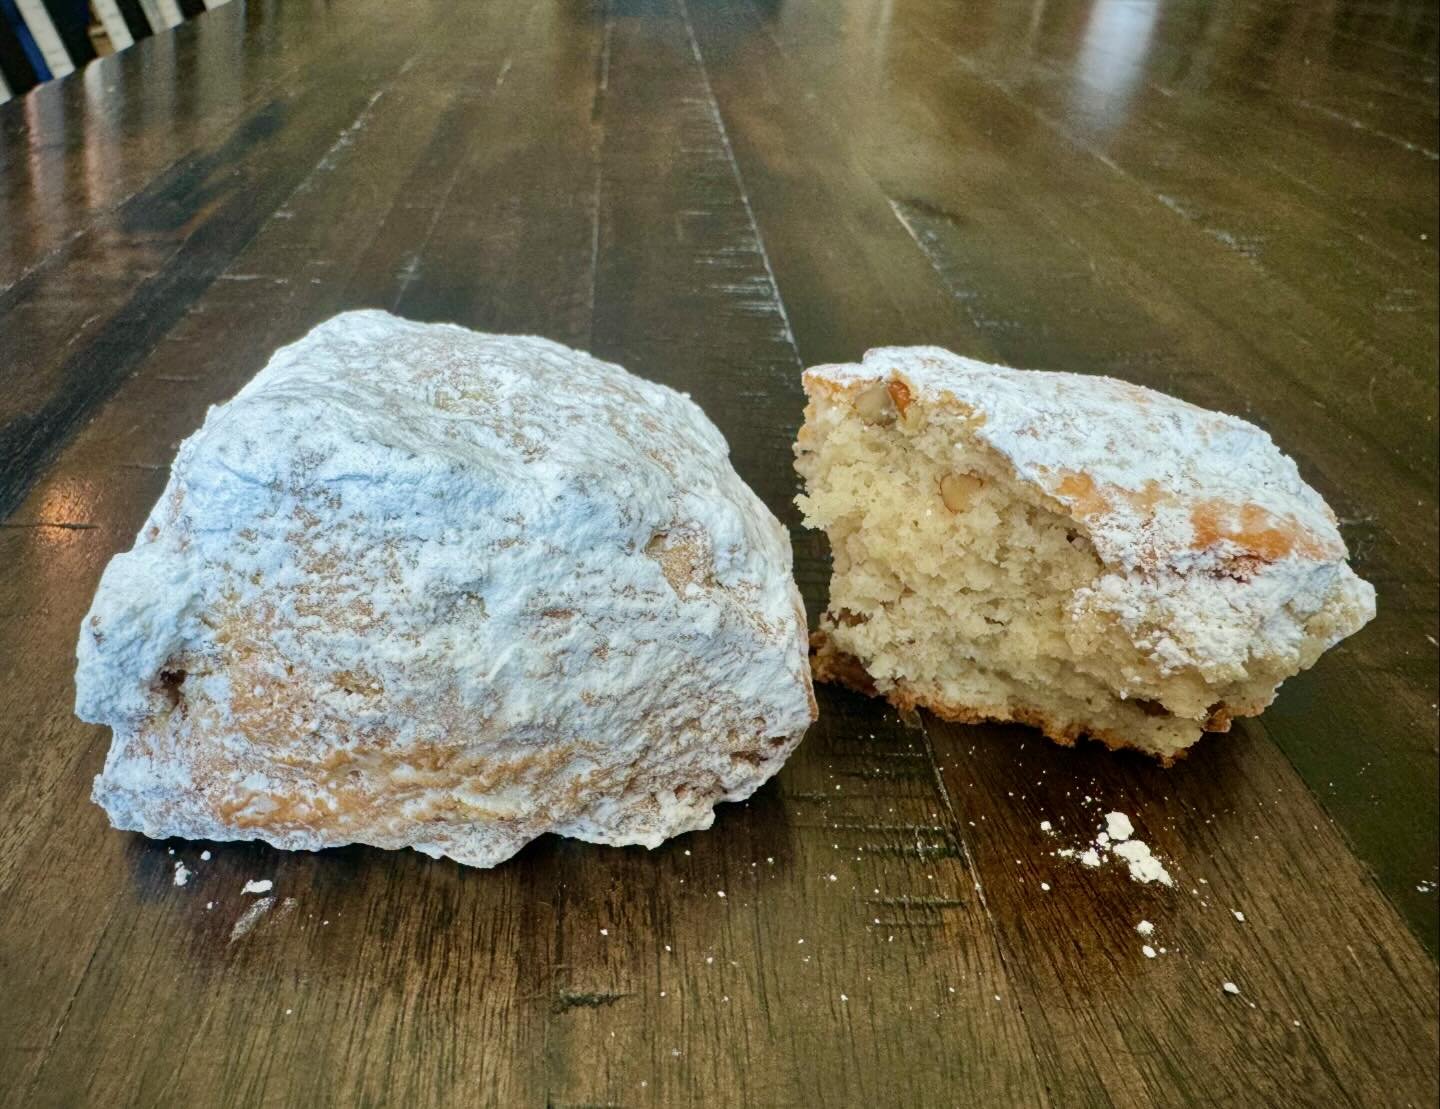 Today we tested Mexican wedding cookie scones. So yummy! Our sweet cream scone with cinnamon and pecans, rolled in powdered sugar. Is it breakfast or dessert? Both! This Saturday with our Cinco de Mayo takeover menu @vineyardfarmersmarket and @enzos.